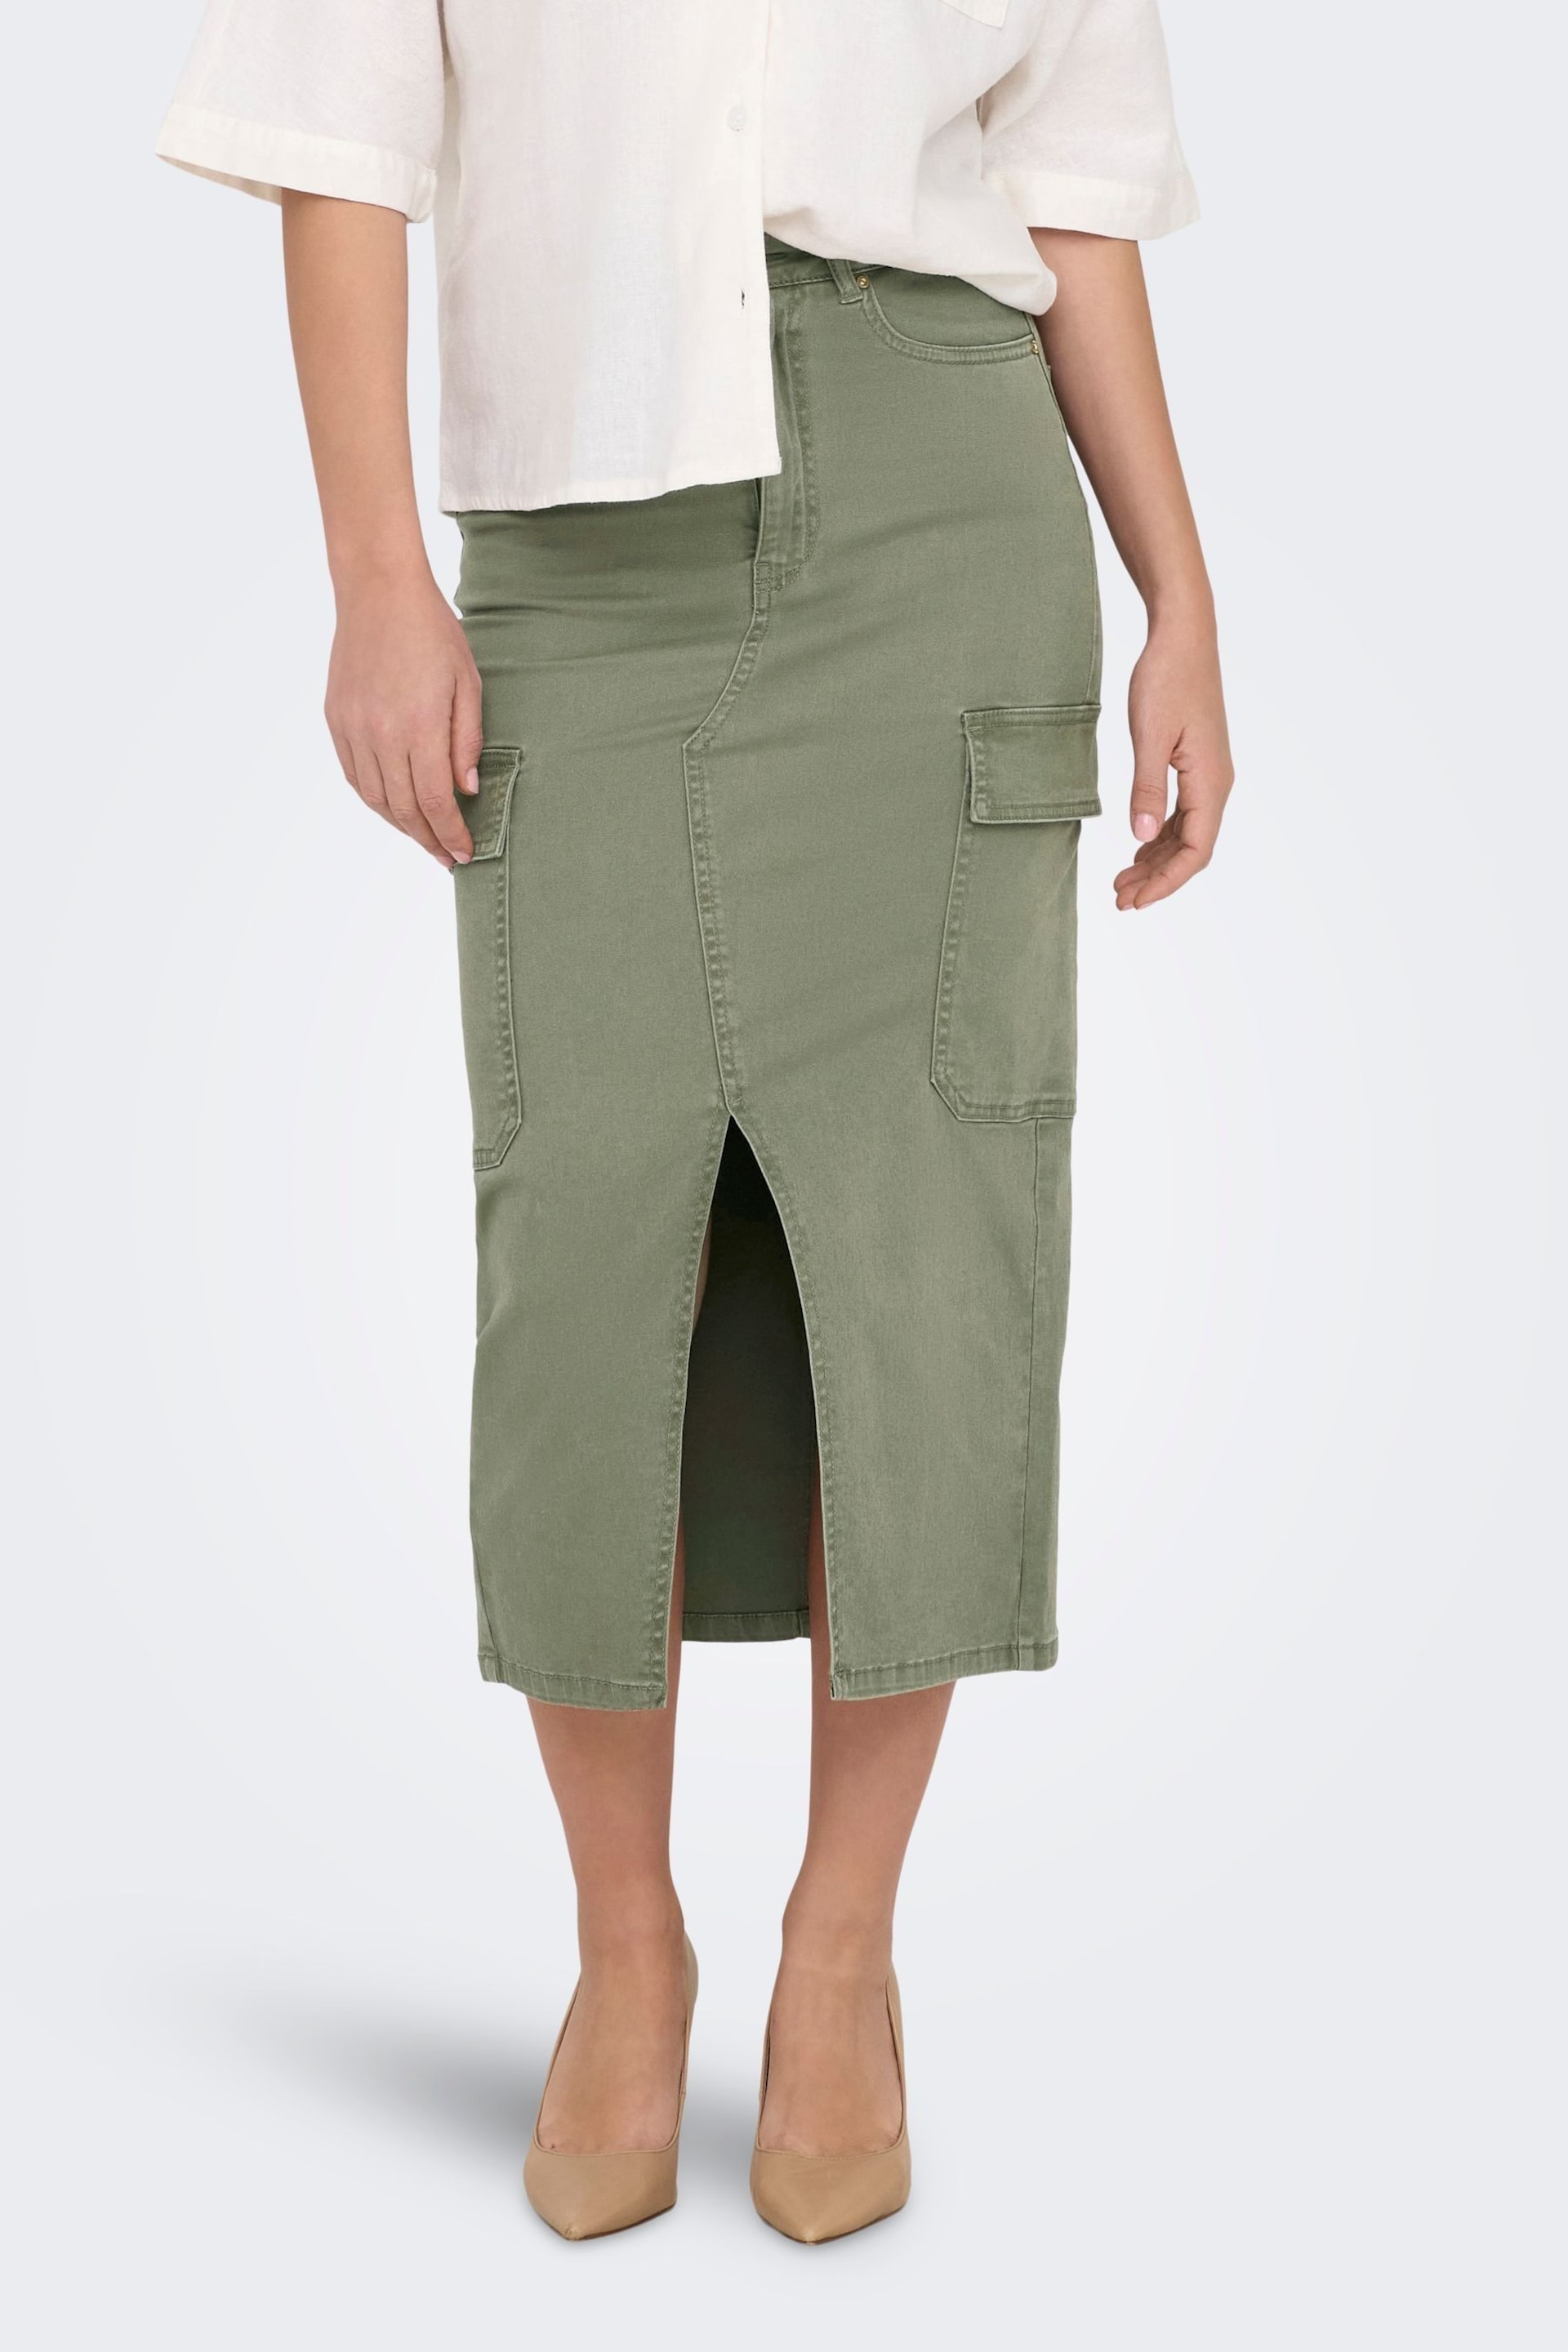 ONLY Green Utility Midi Skirt With Front Split - Image 2 of 8